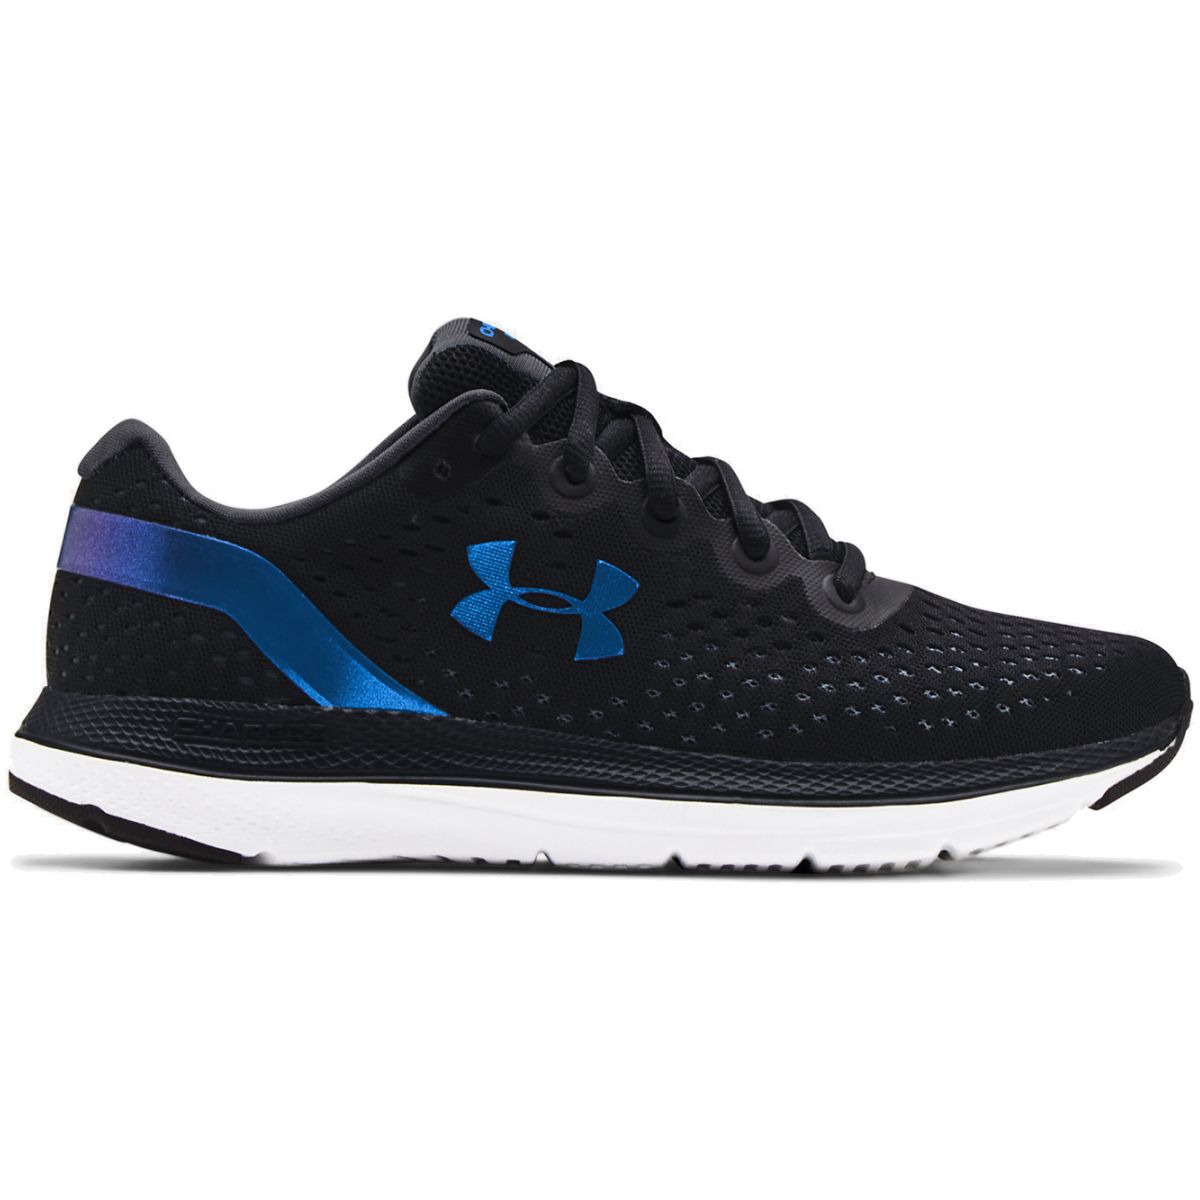 Under Armour Charged Impulse Shft Women's Running Shoes 3024